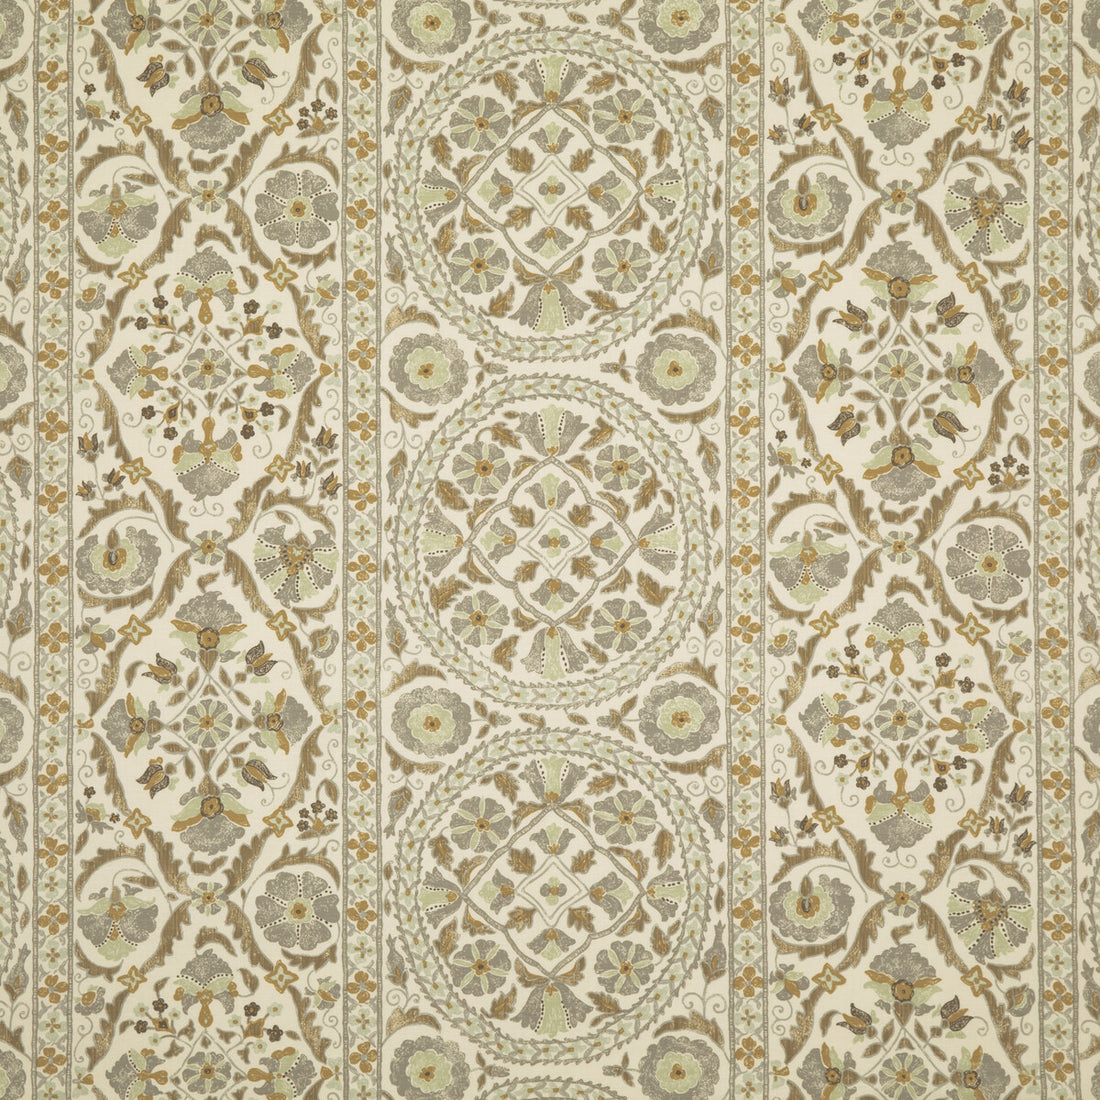 Bokhara Susani fabric in mist color - pattern 8018121.161.0 - by Brunschwig &amp; Fils in the Baret collection